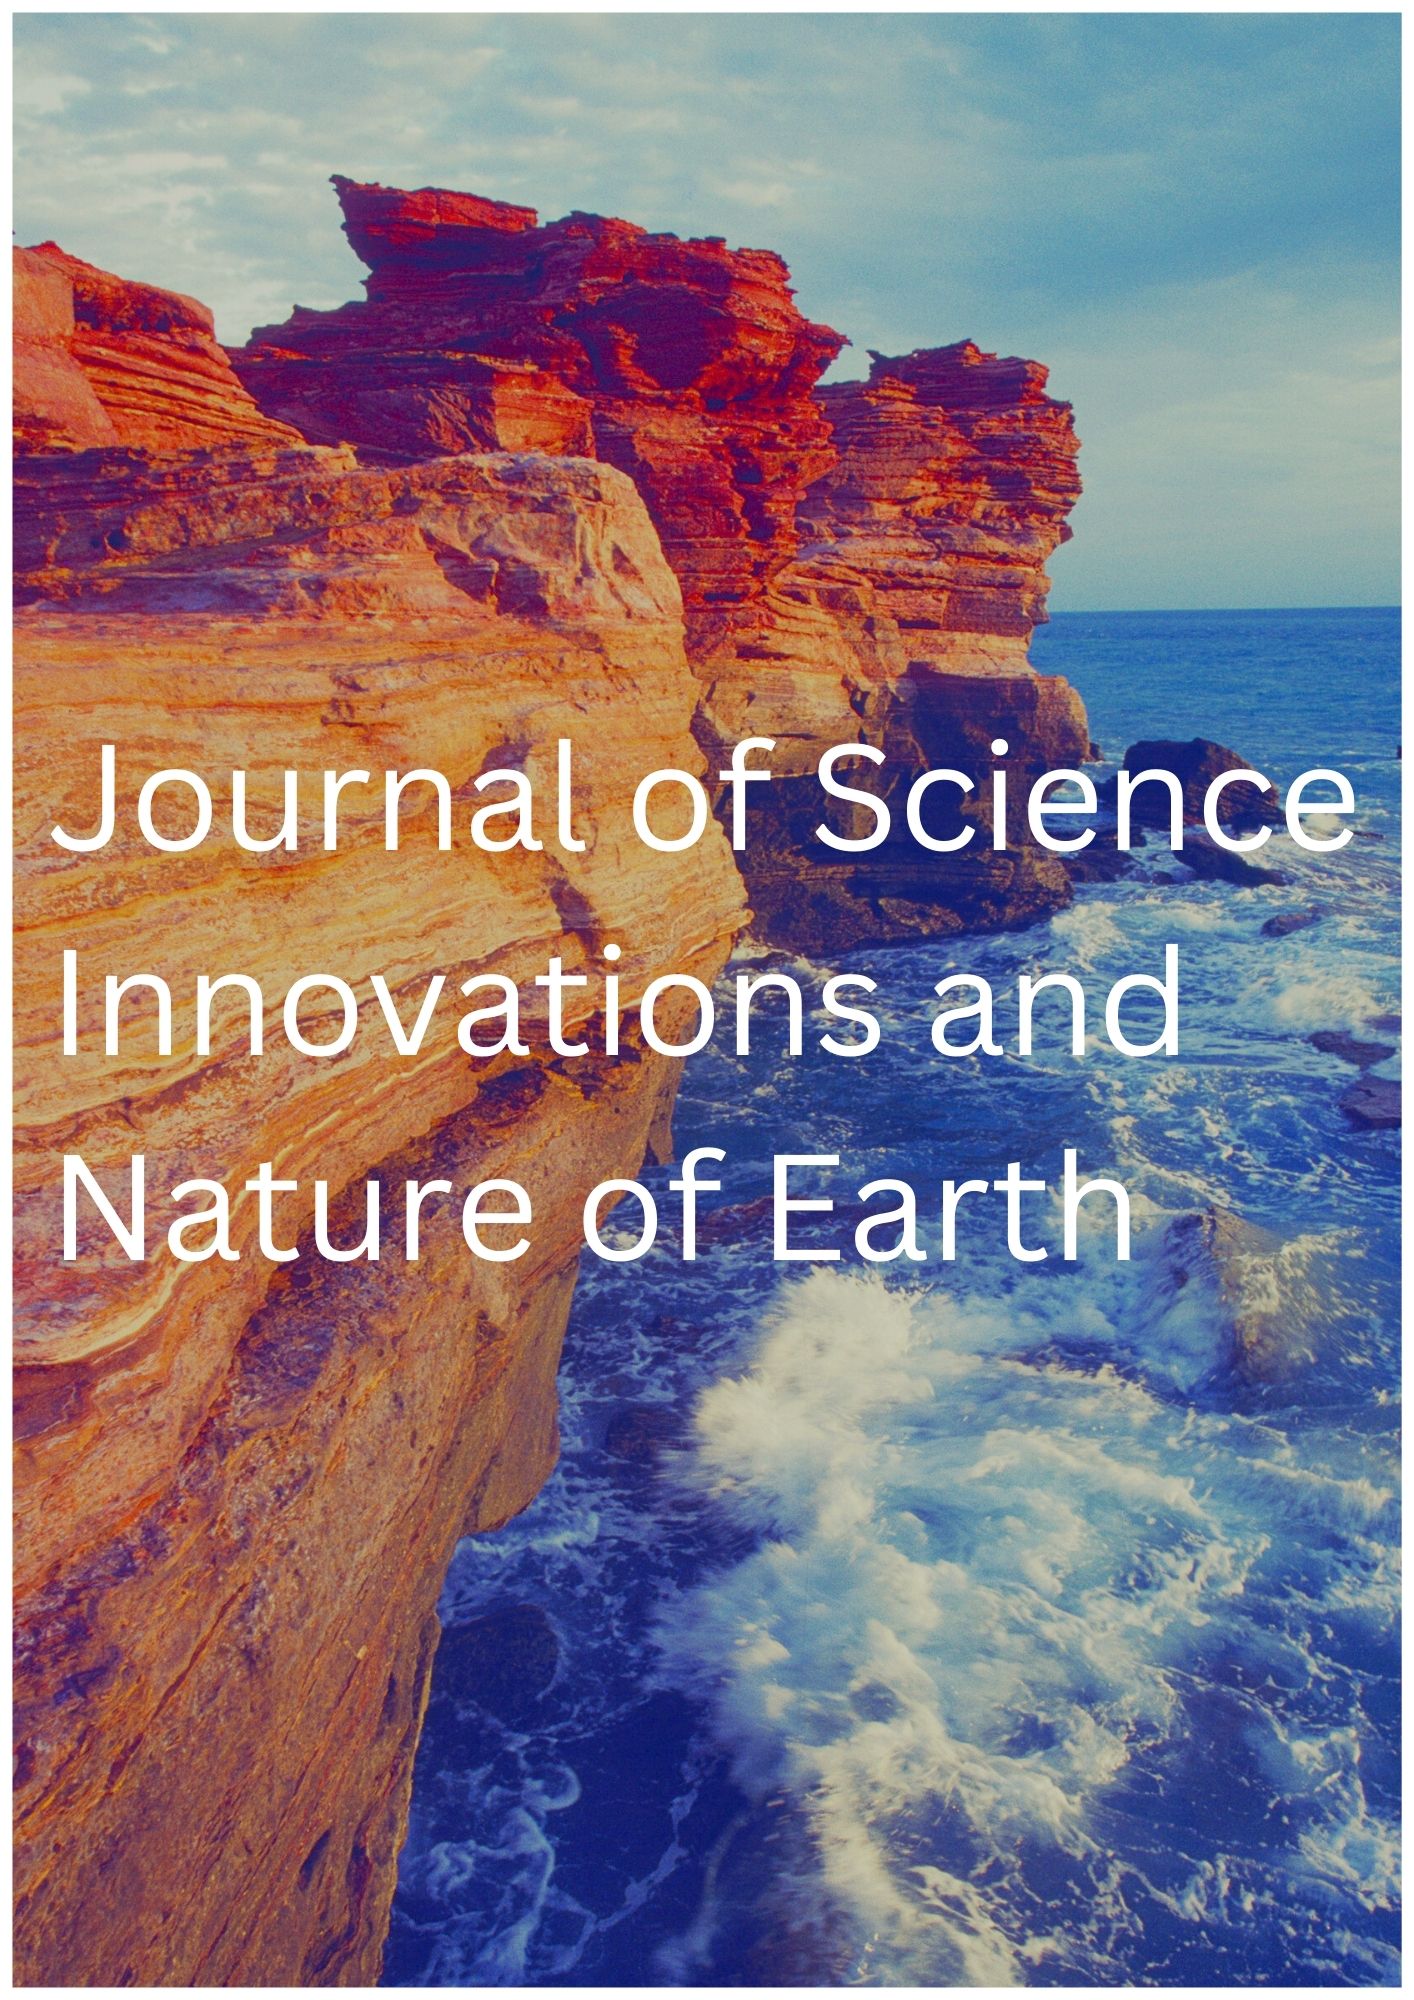 Journal of Science Innovations and Nature of Earth